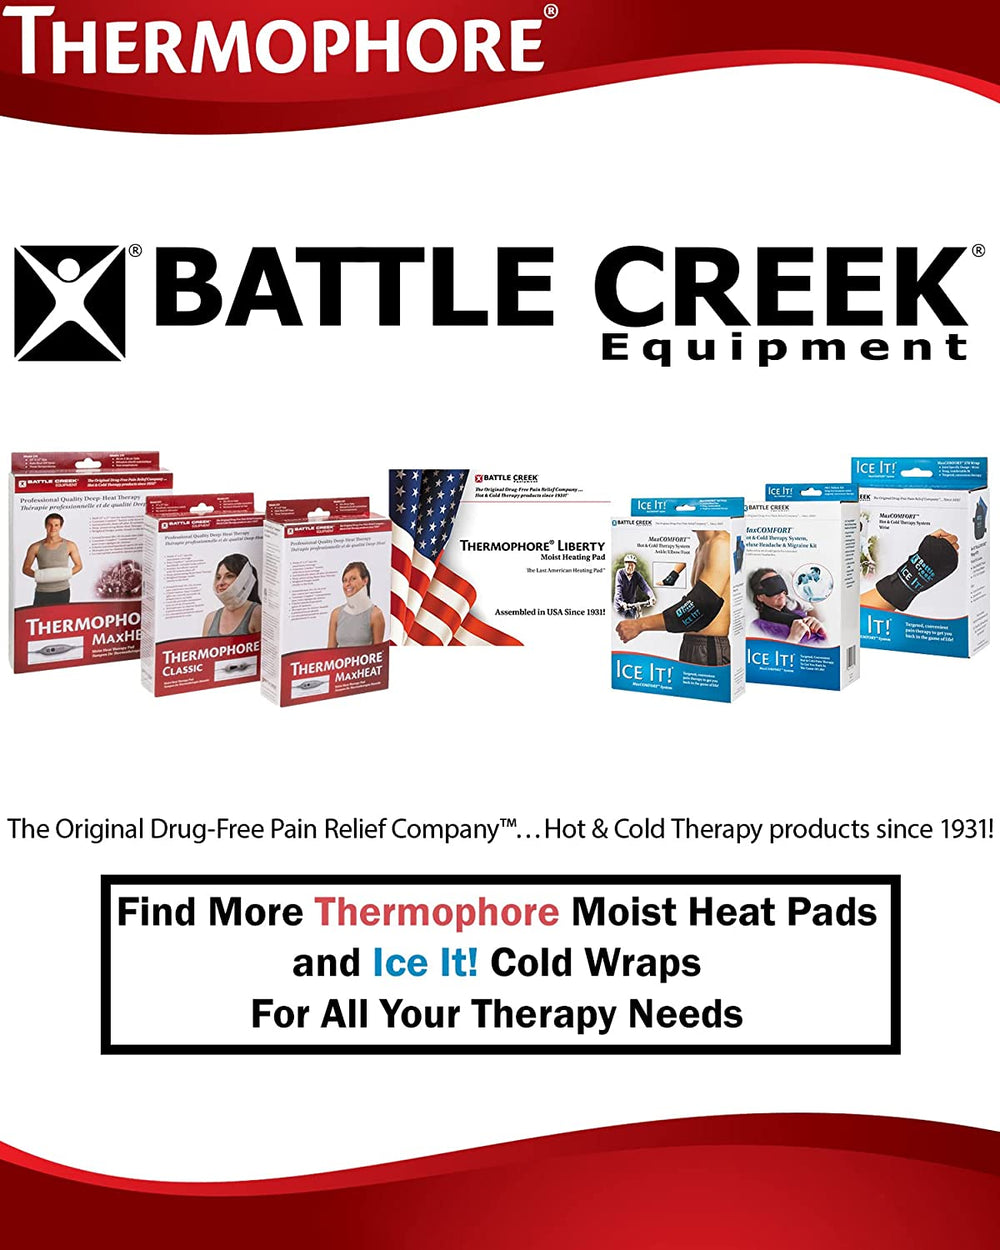  Photo of Battle creek equipment different products